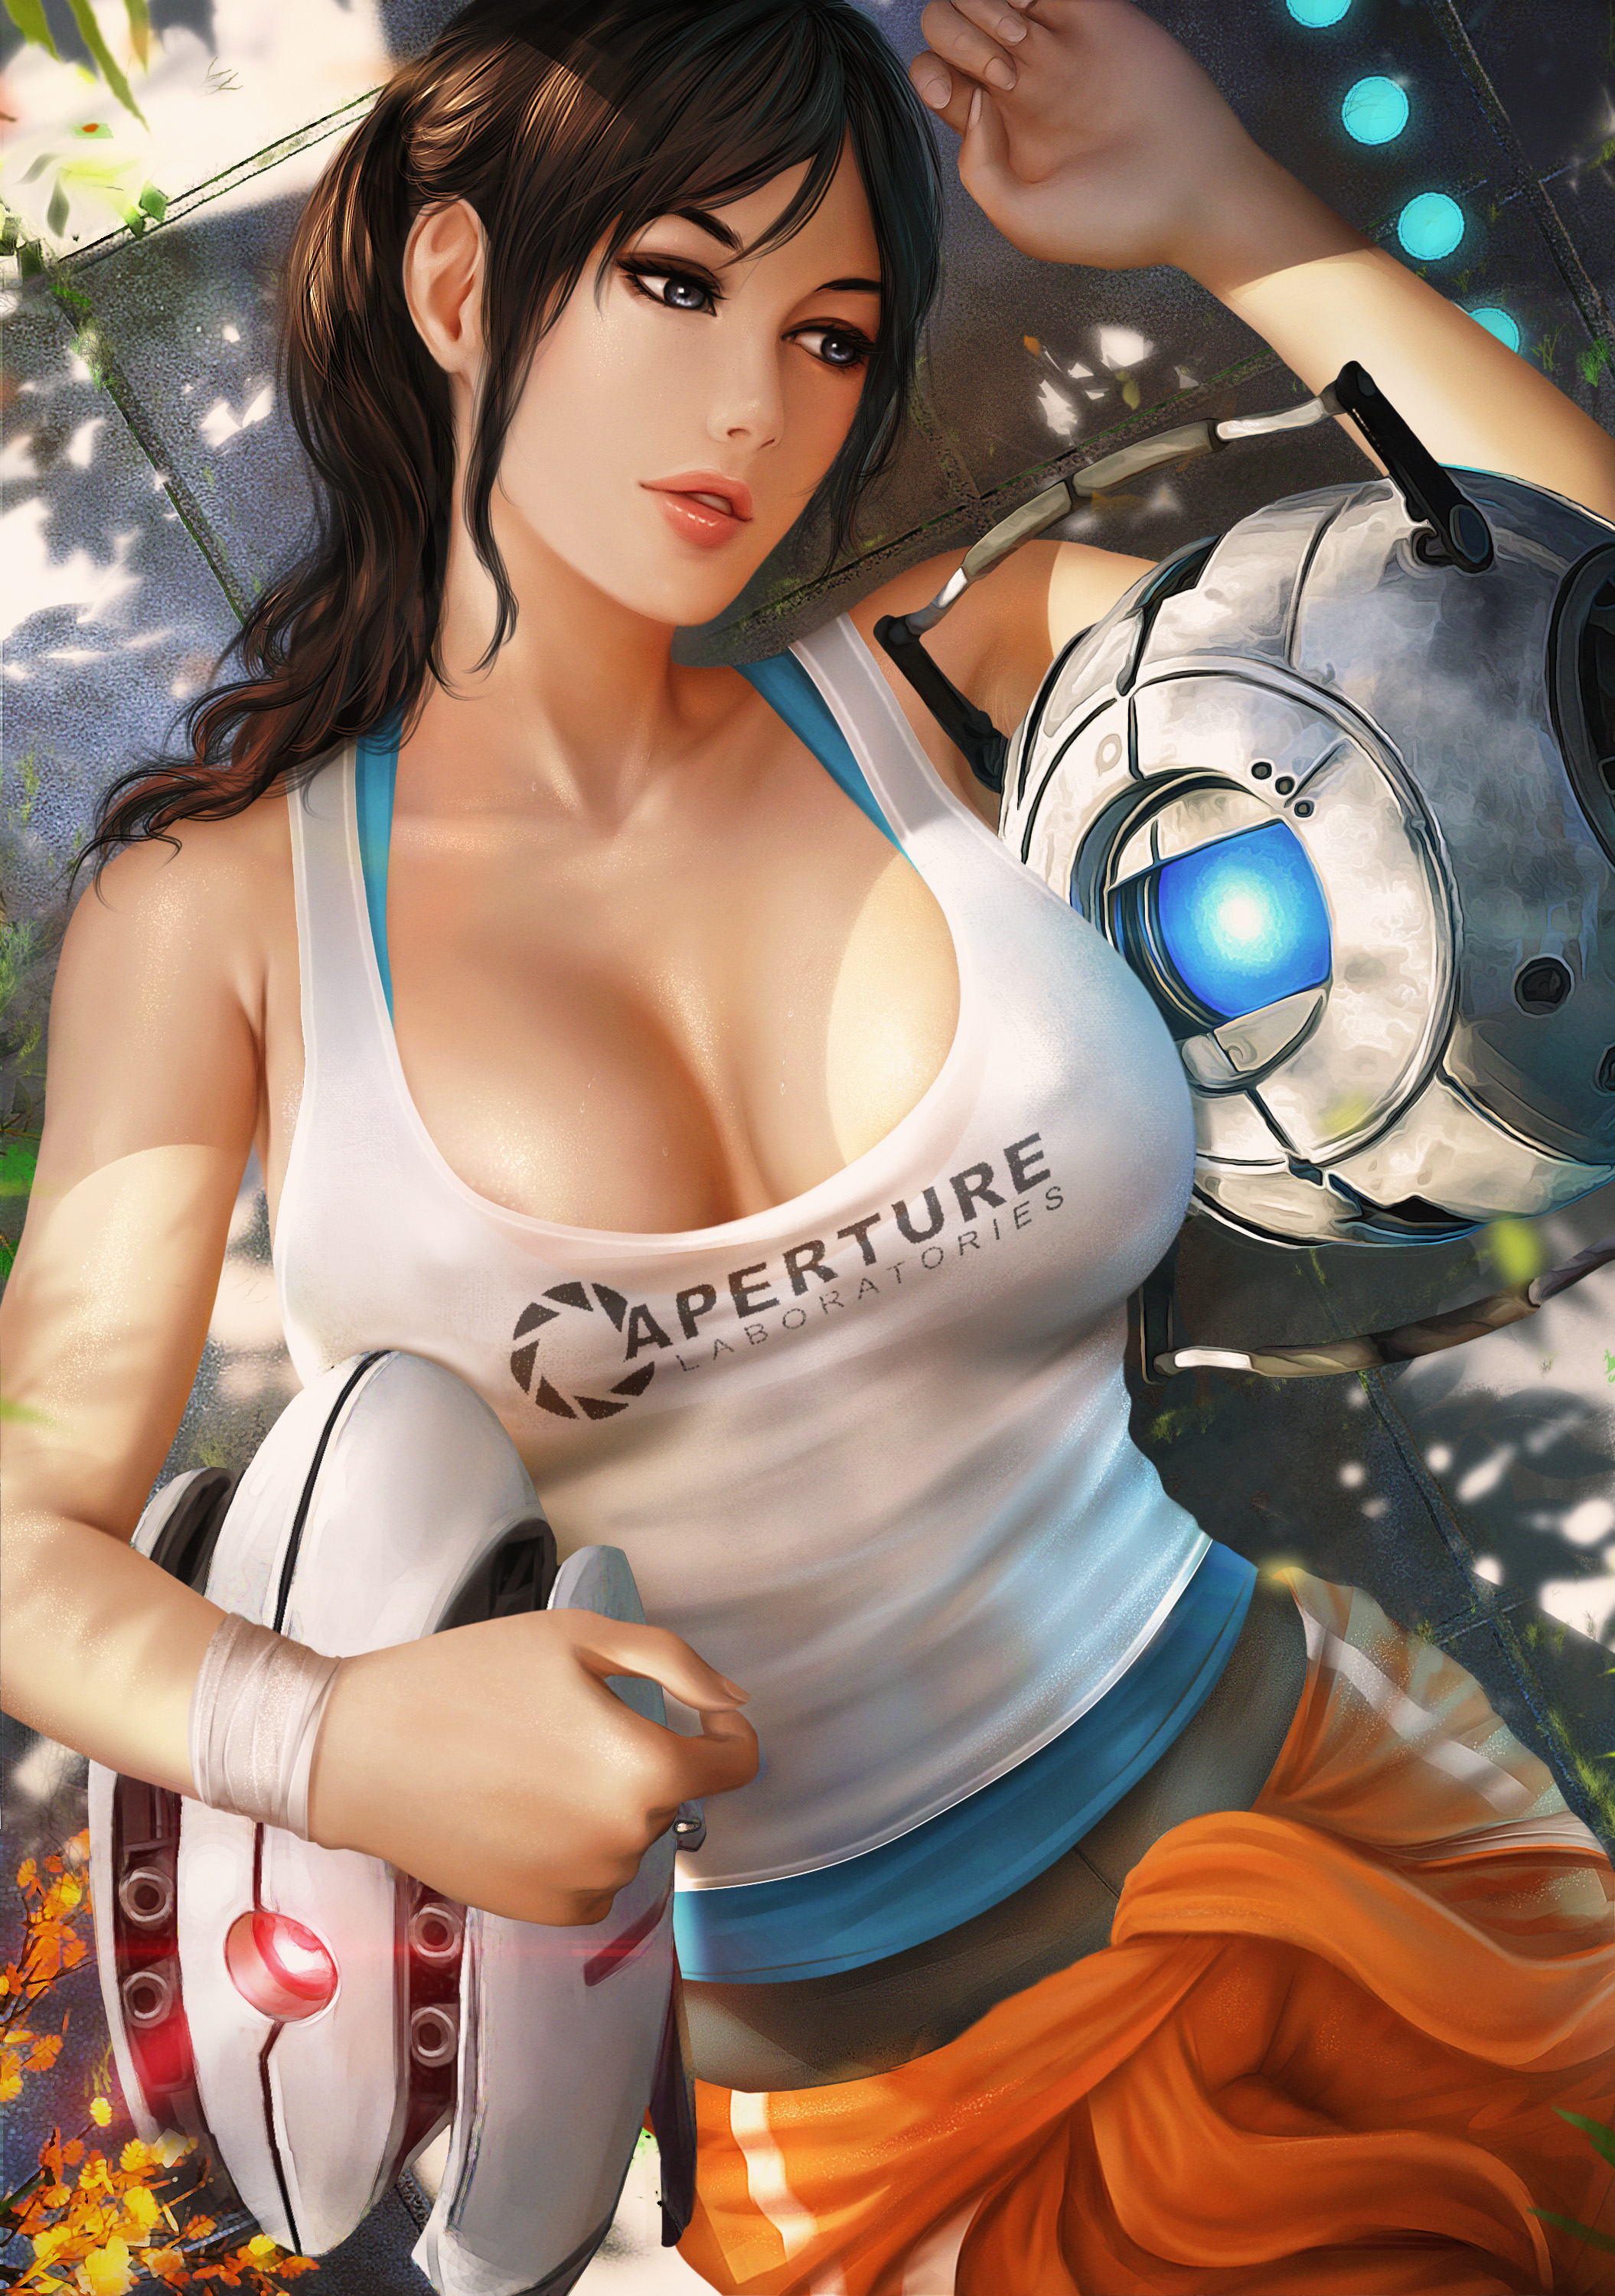 Chell Portal 2 Video Games Video Game Girls Robot White Tops Parted Lips Artwork Drawing Illustratio 2110x3000